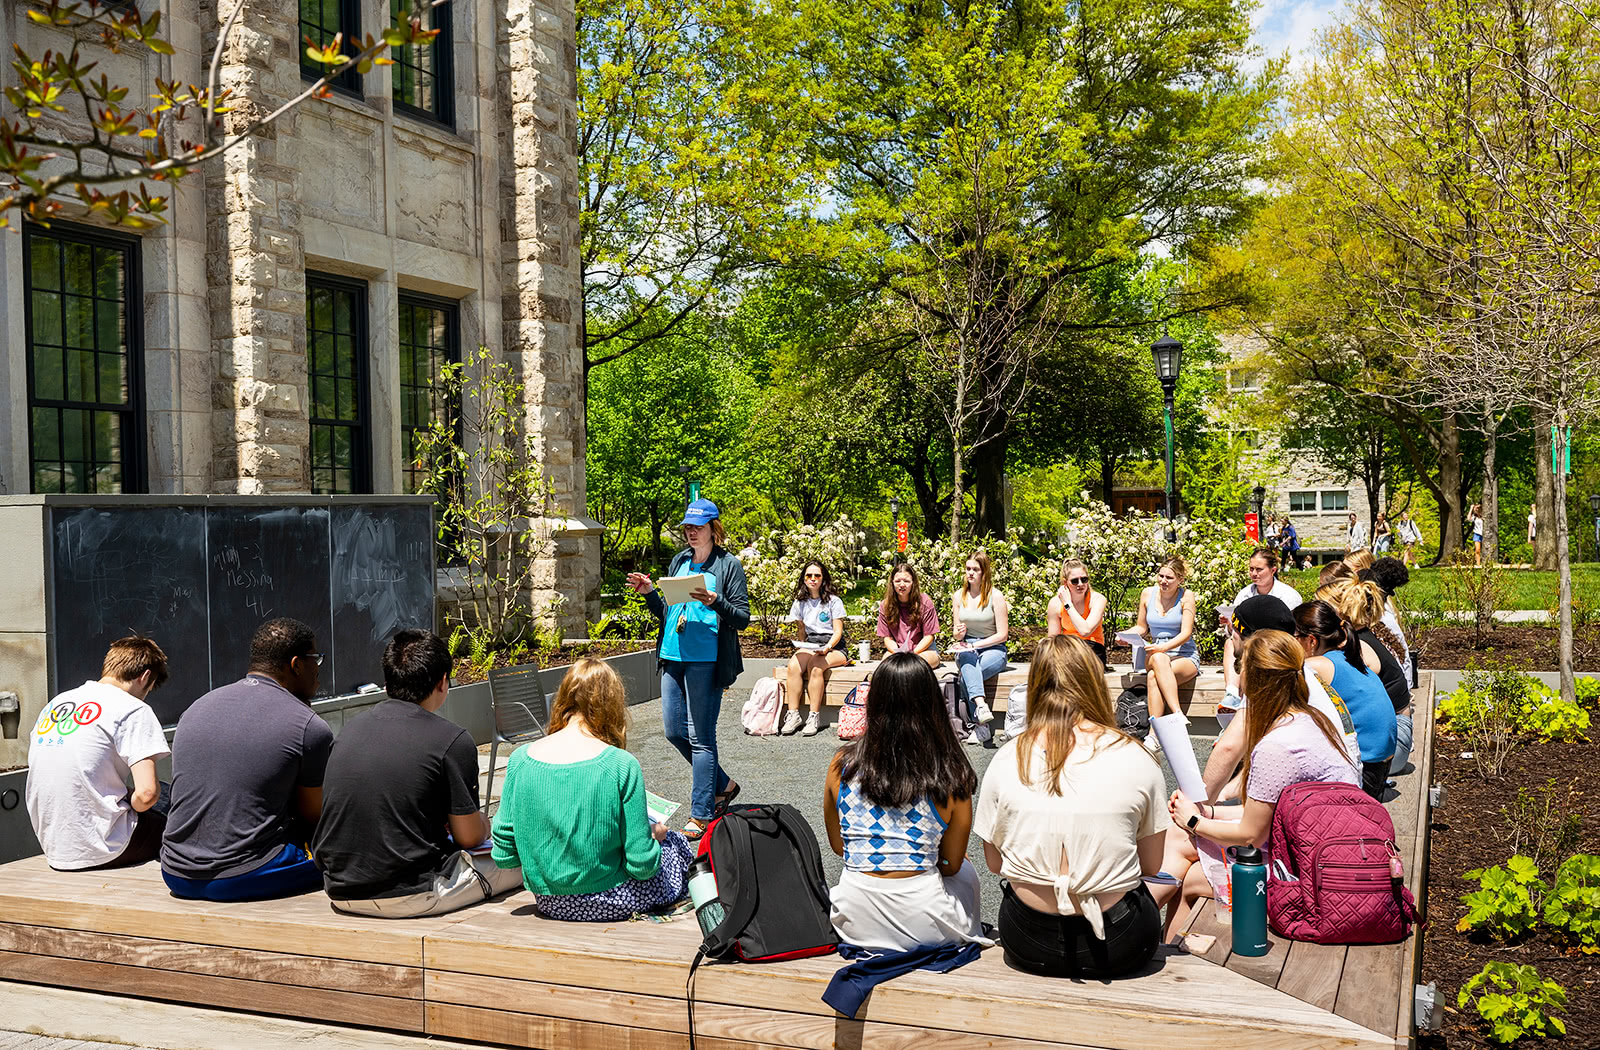 A group of students sitting on benches outdoors on a bright and sunny day watching a lecture